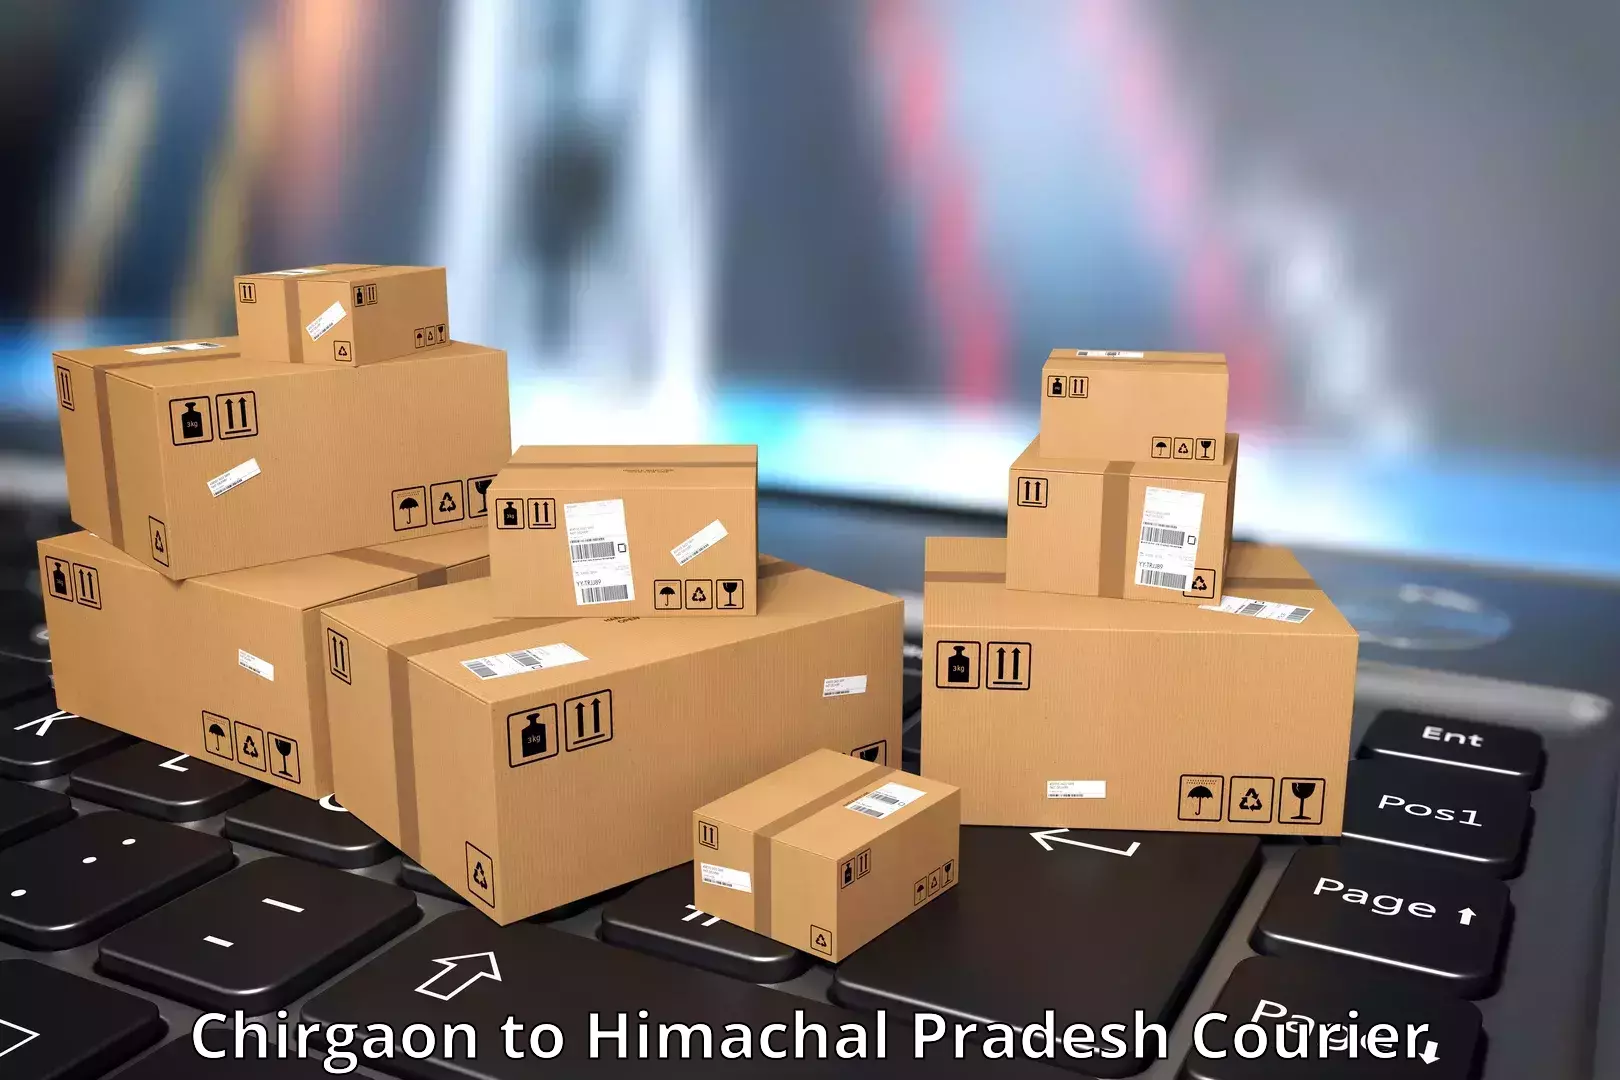 Advanced delivery network Chirgaon to Himachal Pradesh